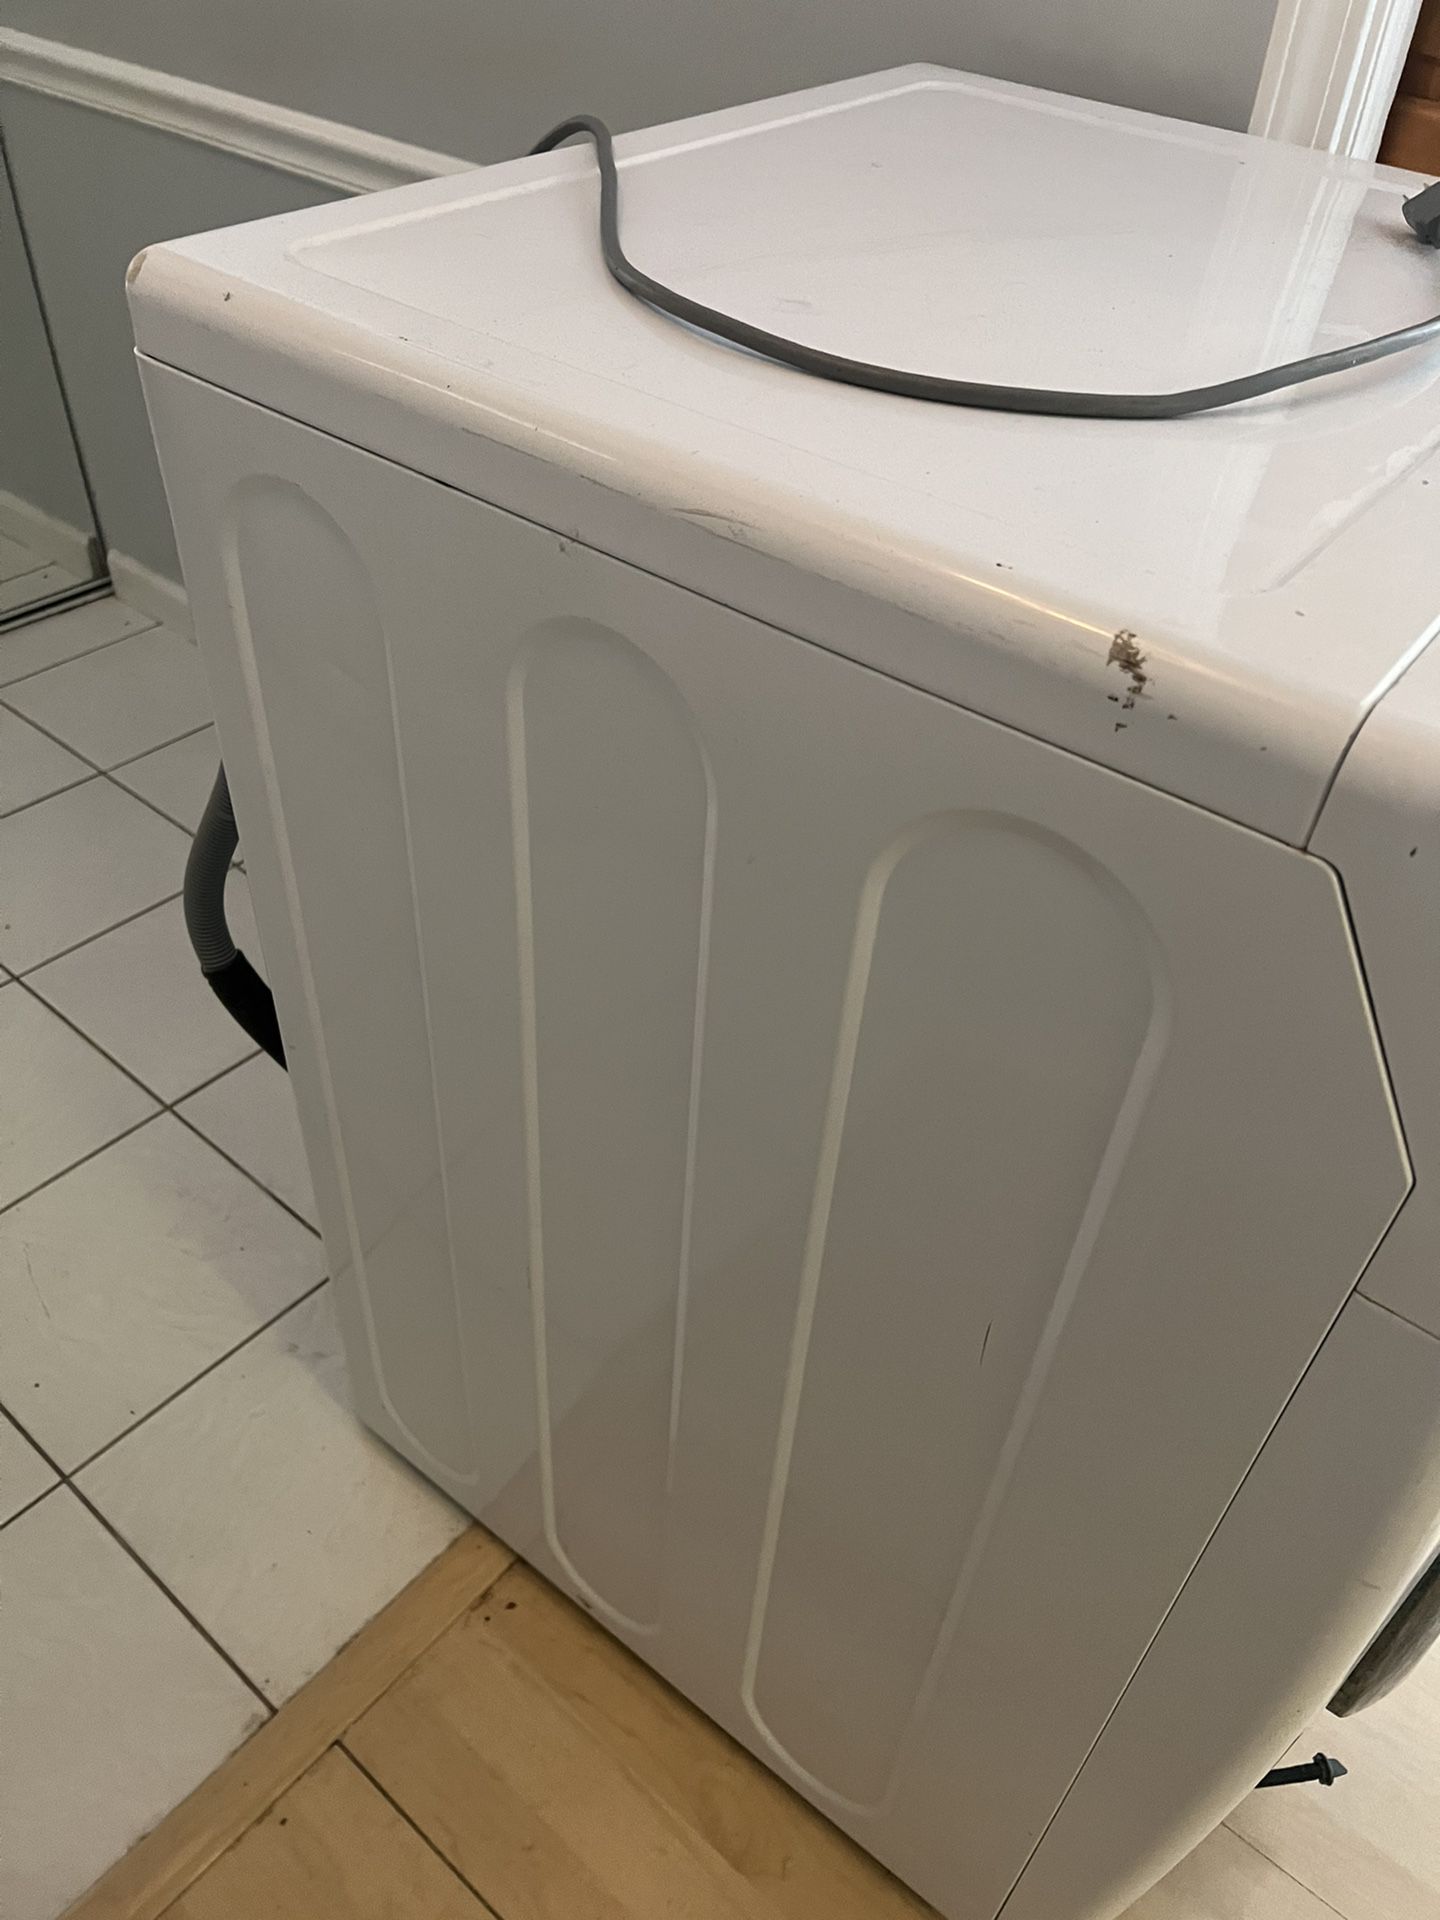 Free Samsung Washer ( Doesn’t Spin ) Needs Repair 